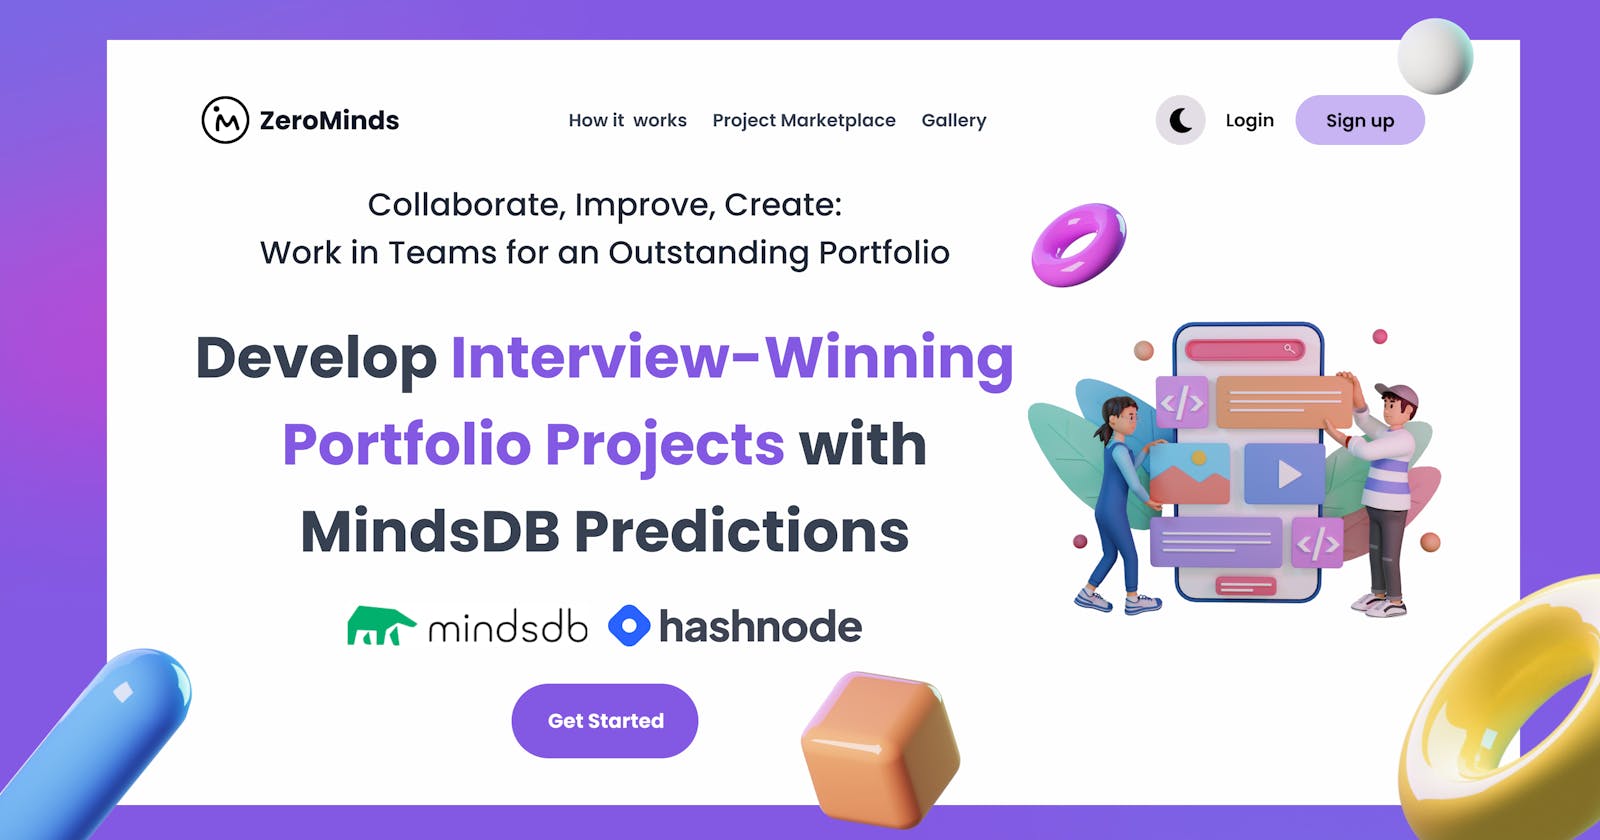 Develop Interview-Winning Portfolio Projects with MindsDB Predictions